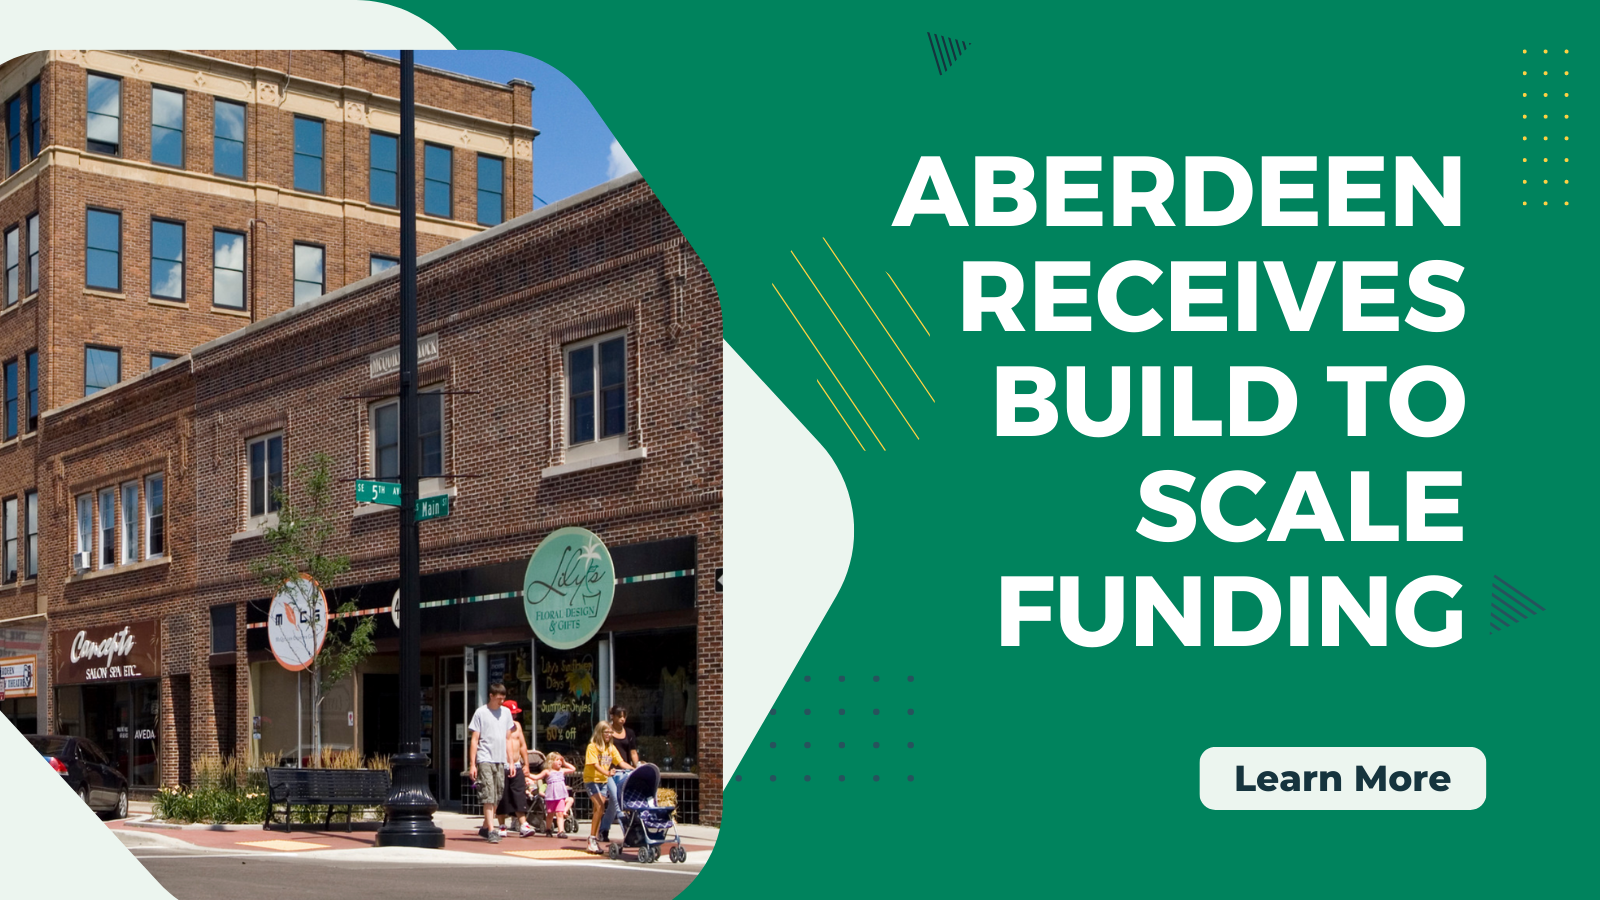 Aberdeen receives build to scale funding graphic with image of downtown